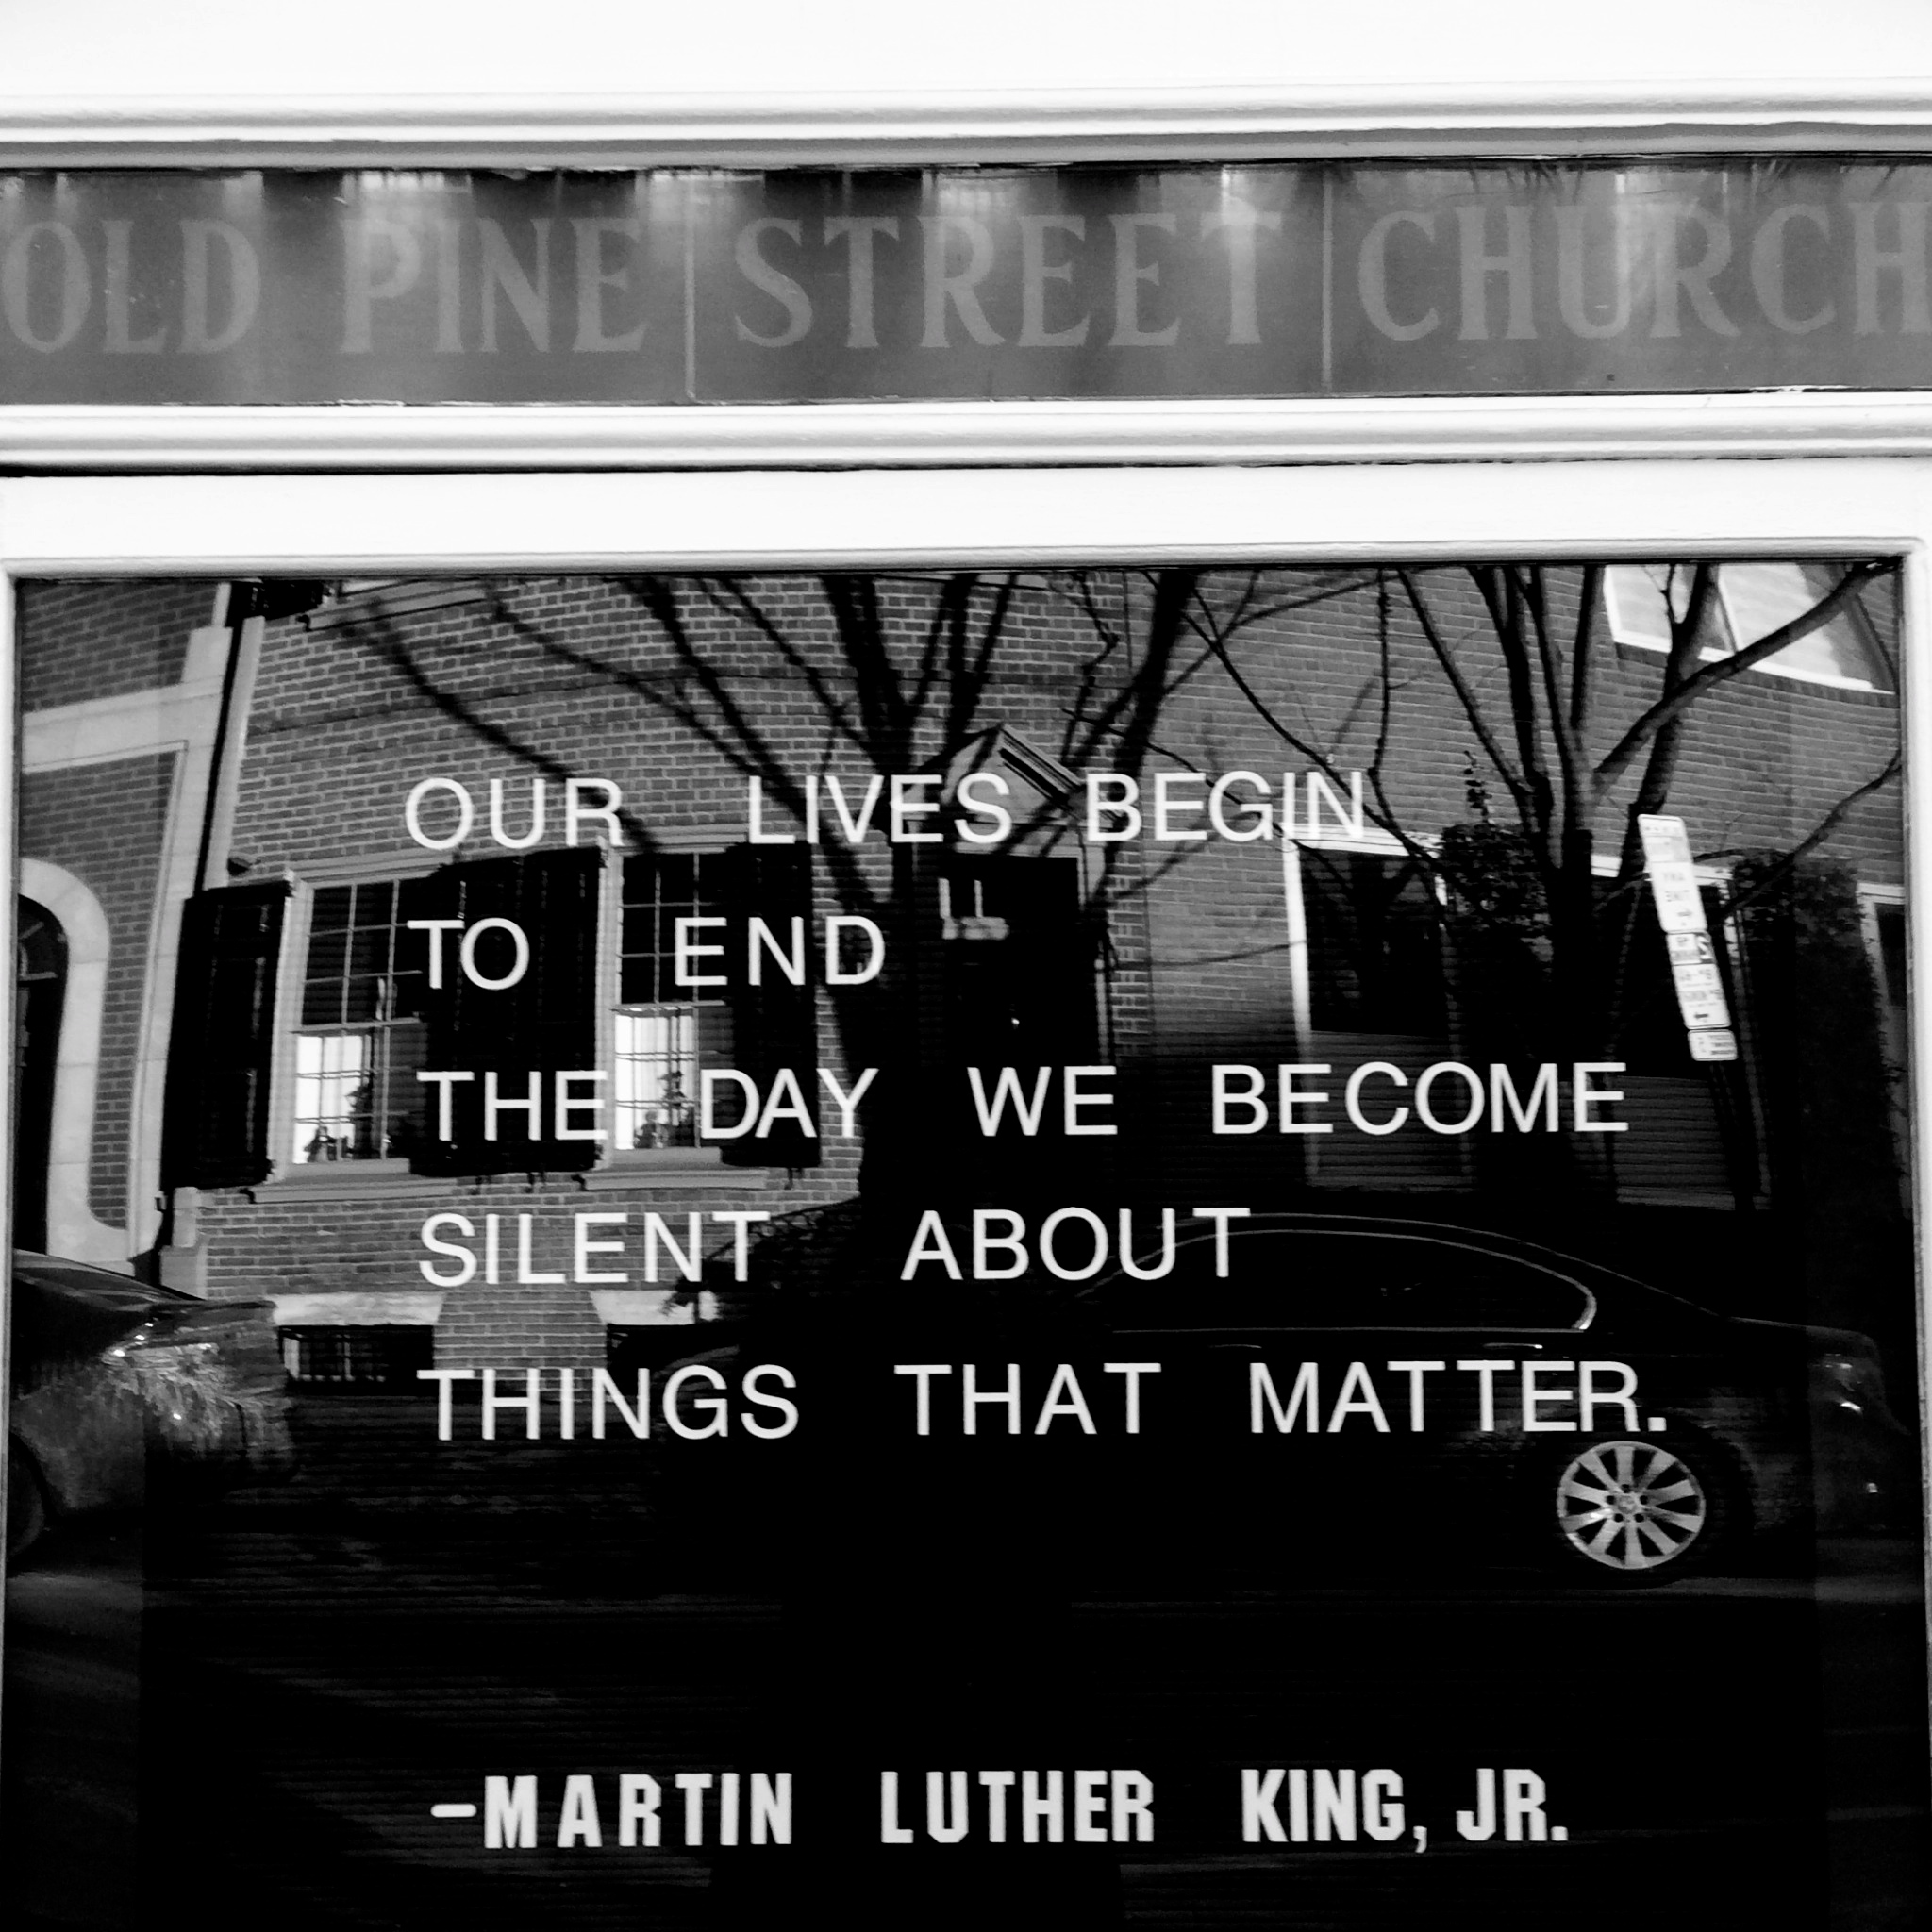 Our lives begin to end the day we become silent about things that matter. - Martin Luther King Jr | Old Pine Street Church, January 2014